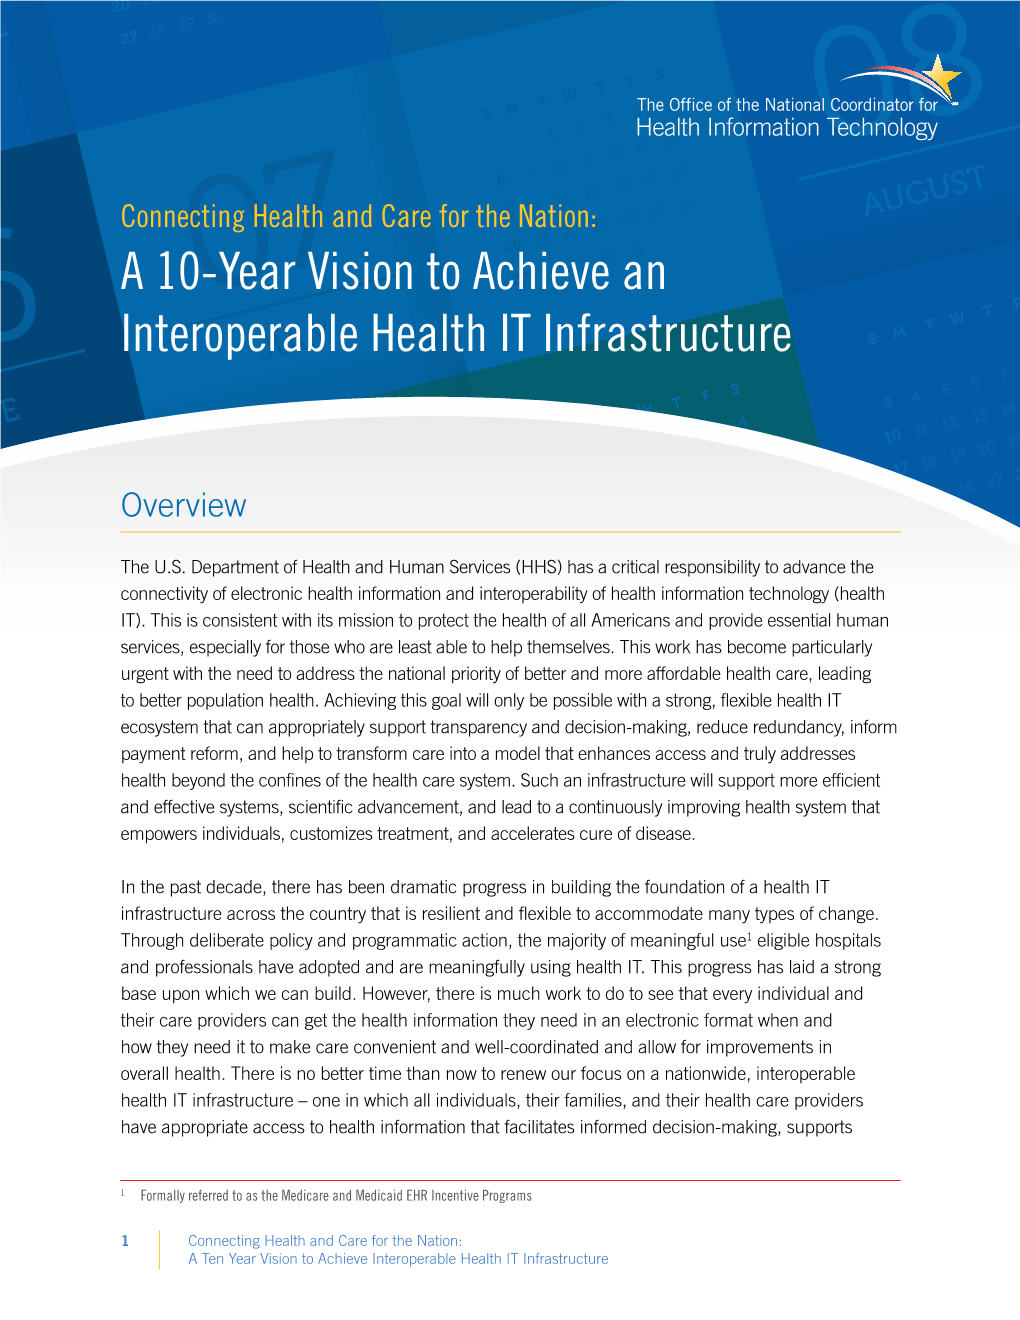 A 10-Year Vision to Achieve an Interoperable Health IT Infrastructure